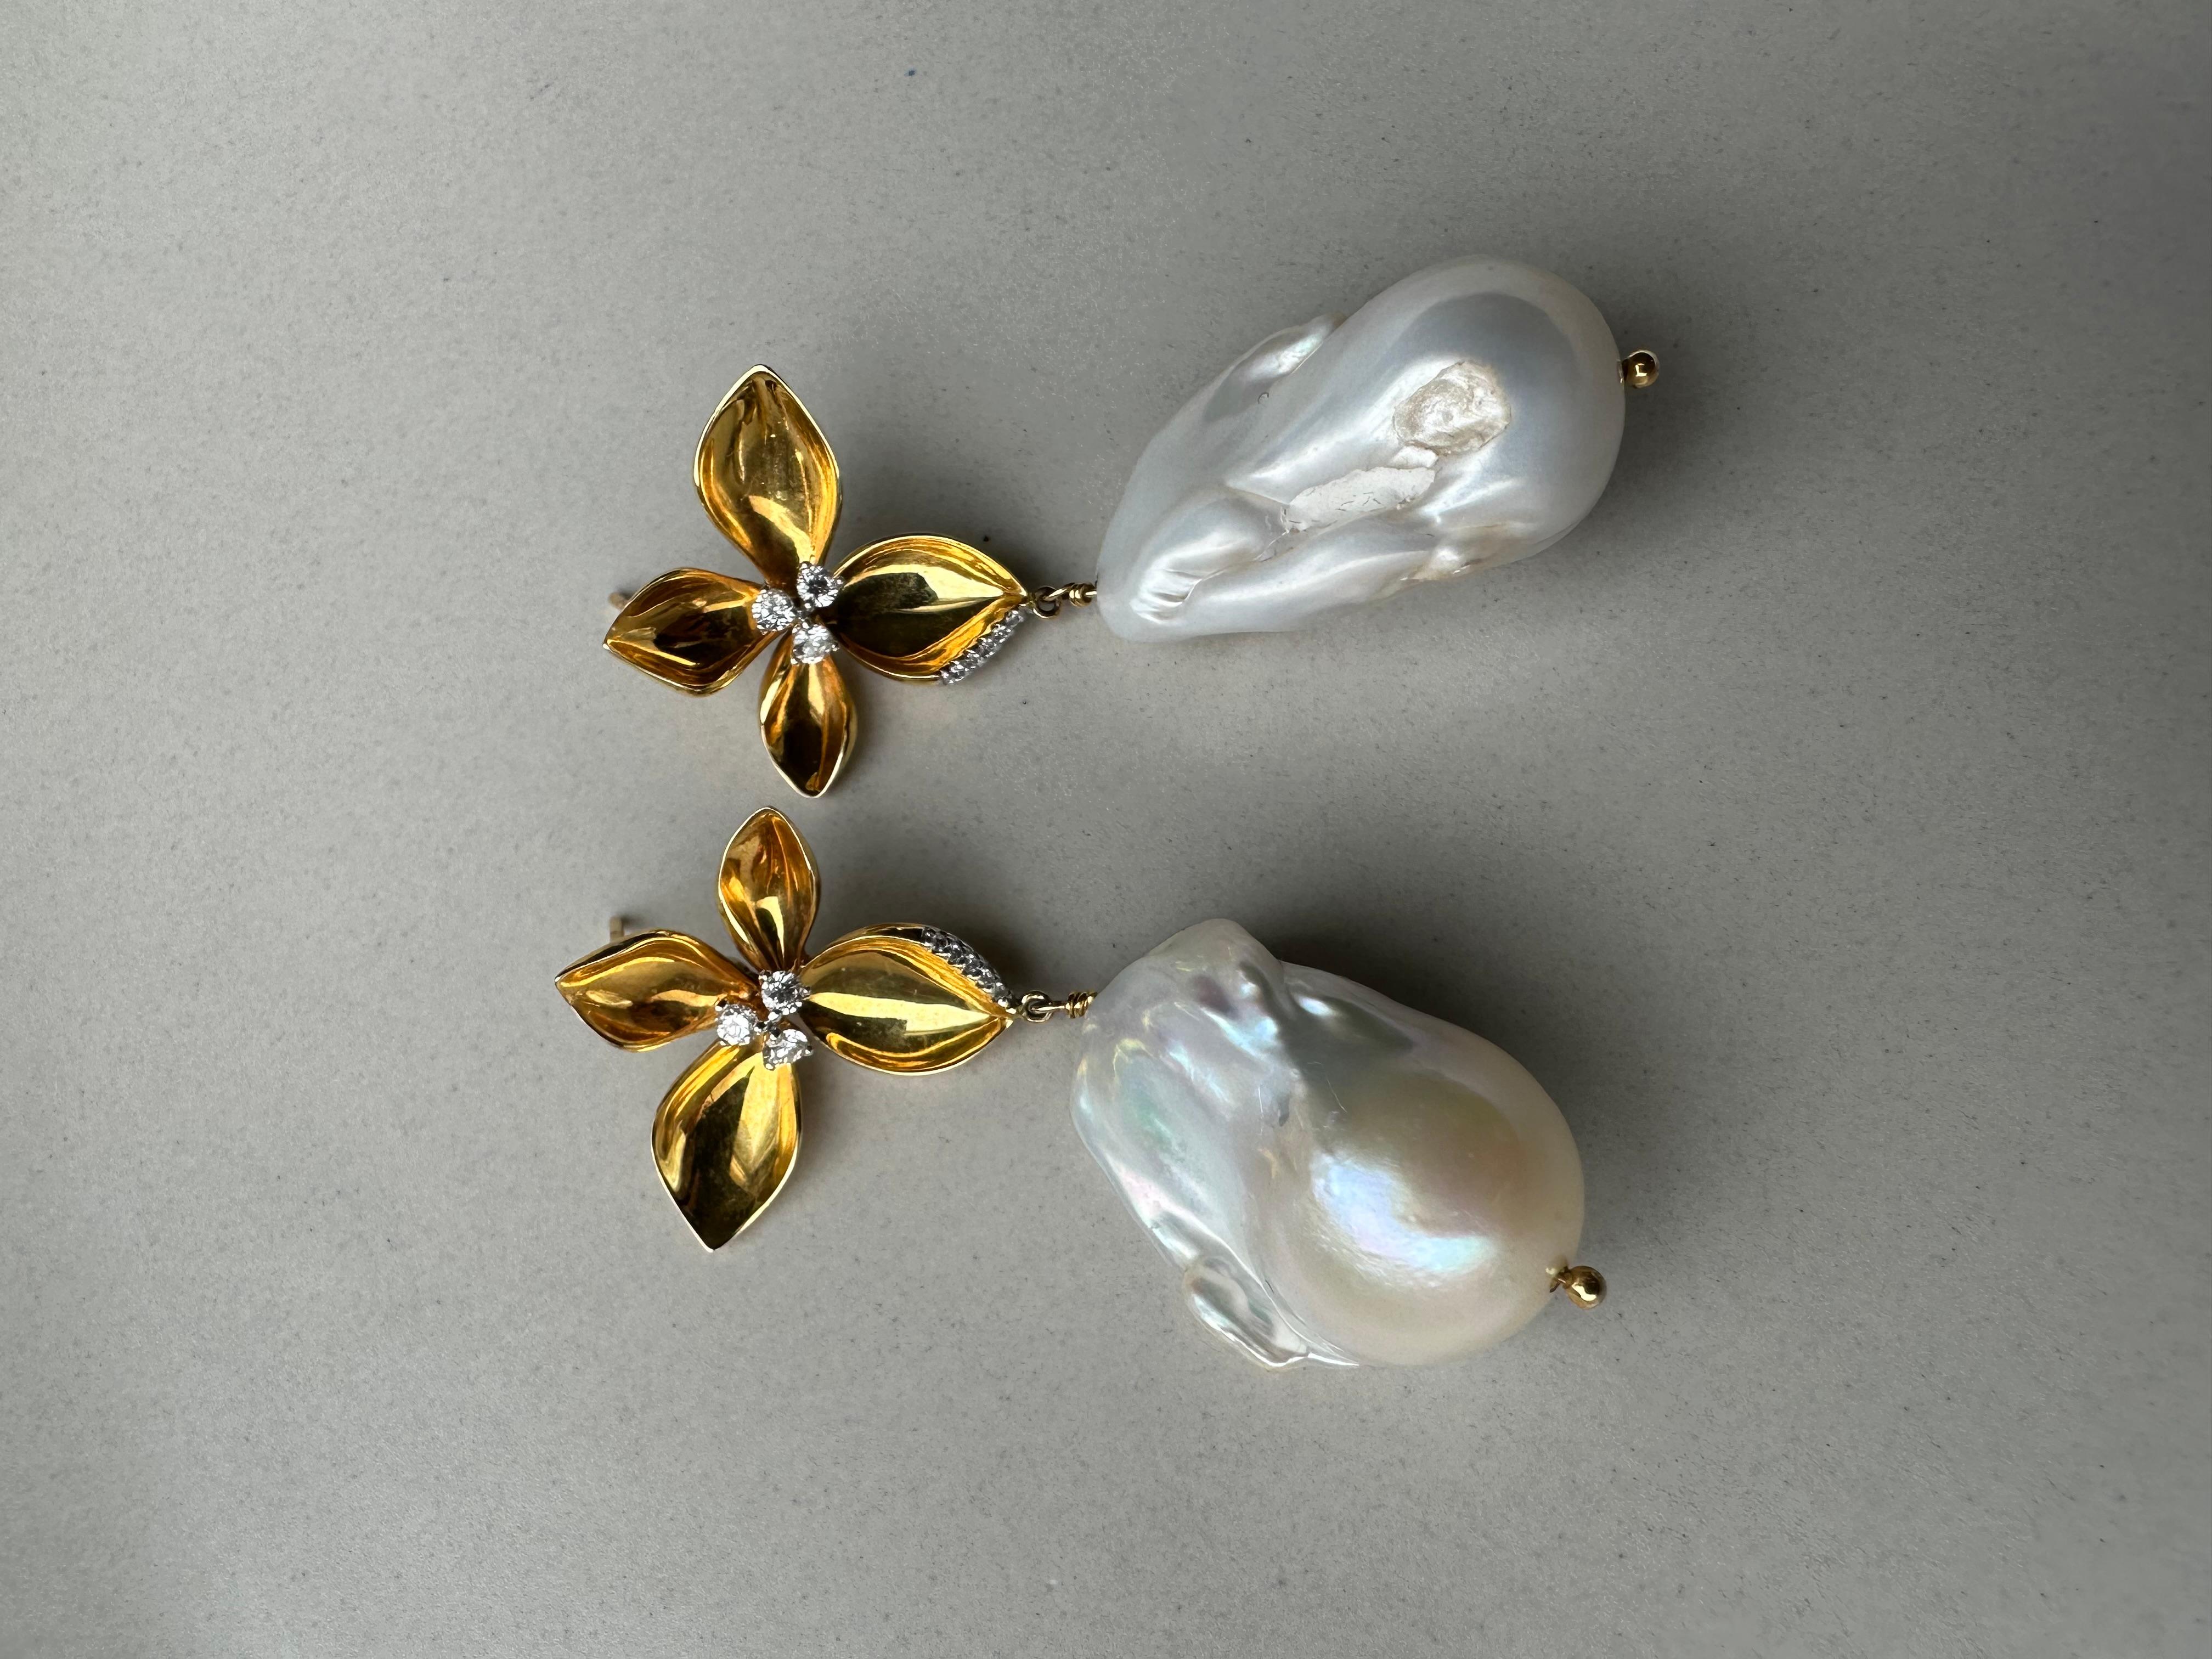 Crown Jewel of the Renaissance Collection.

Meticulously handcrafted floral design exudes a refined yet playful look.

Lustrous gold petals surround the diamond for that extra shimmer.

Finished with dangling Baroque pearl to make it the show